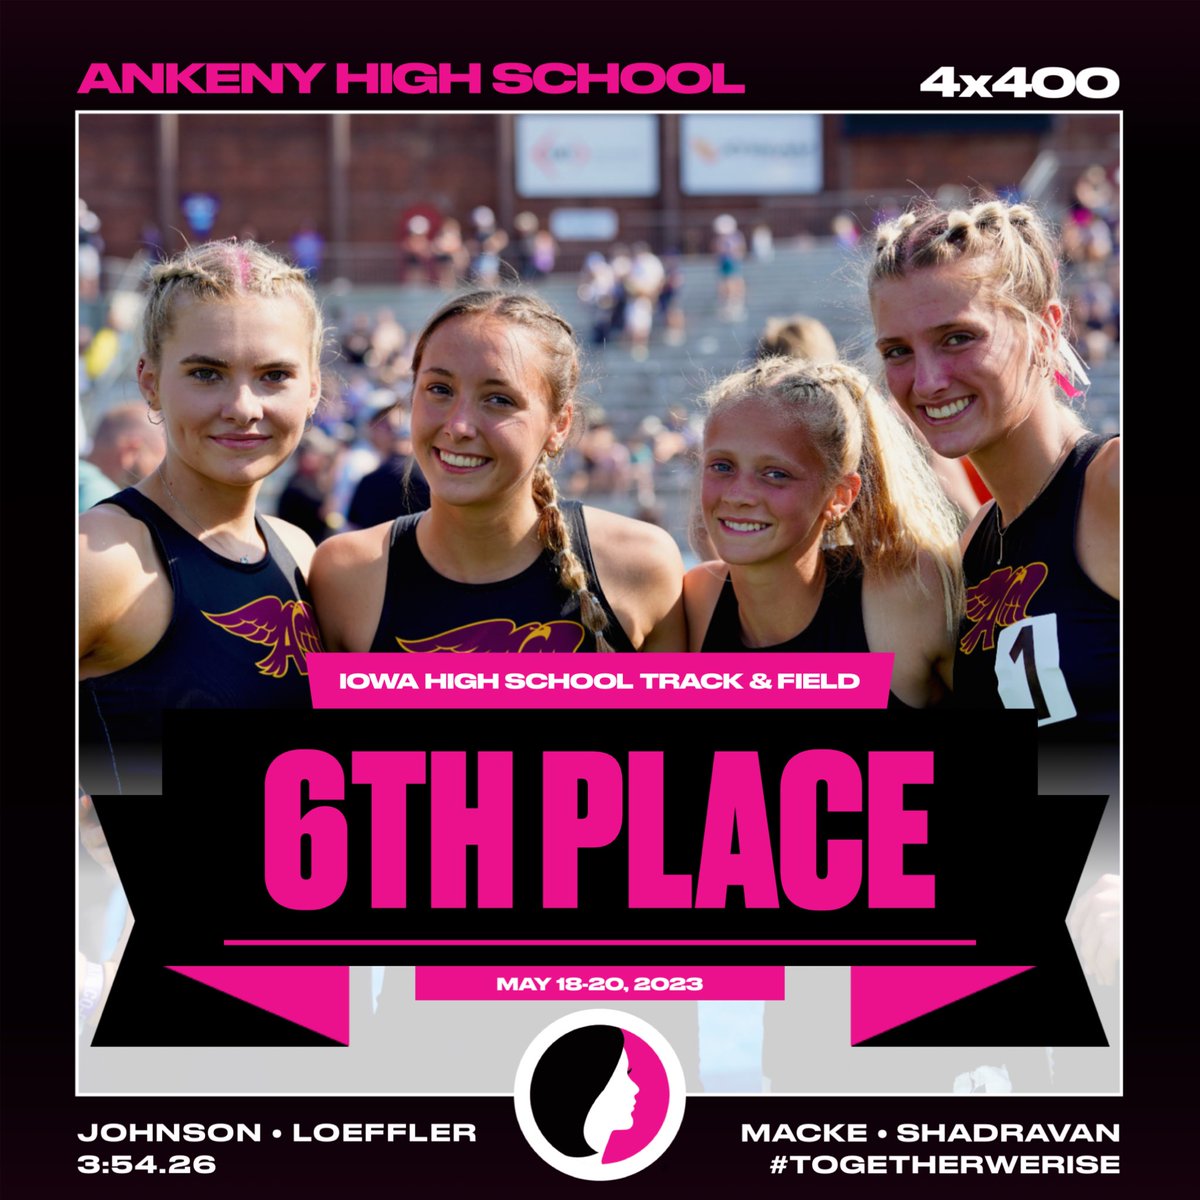 To end the meet and top off a great weekend this quartet placed 6th in the 4x400 and ran 3:54.26 to break a school record from 1981!!! Morgan Johnson, Sophie Loeffler, Alli Macke, Zoe Shadravan